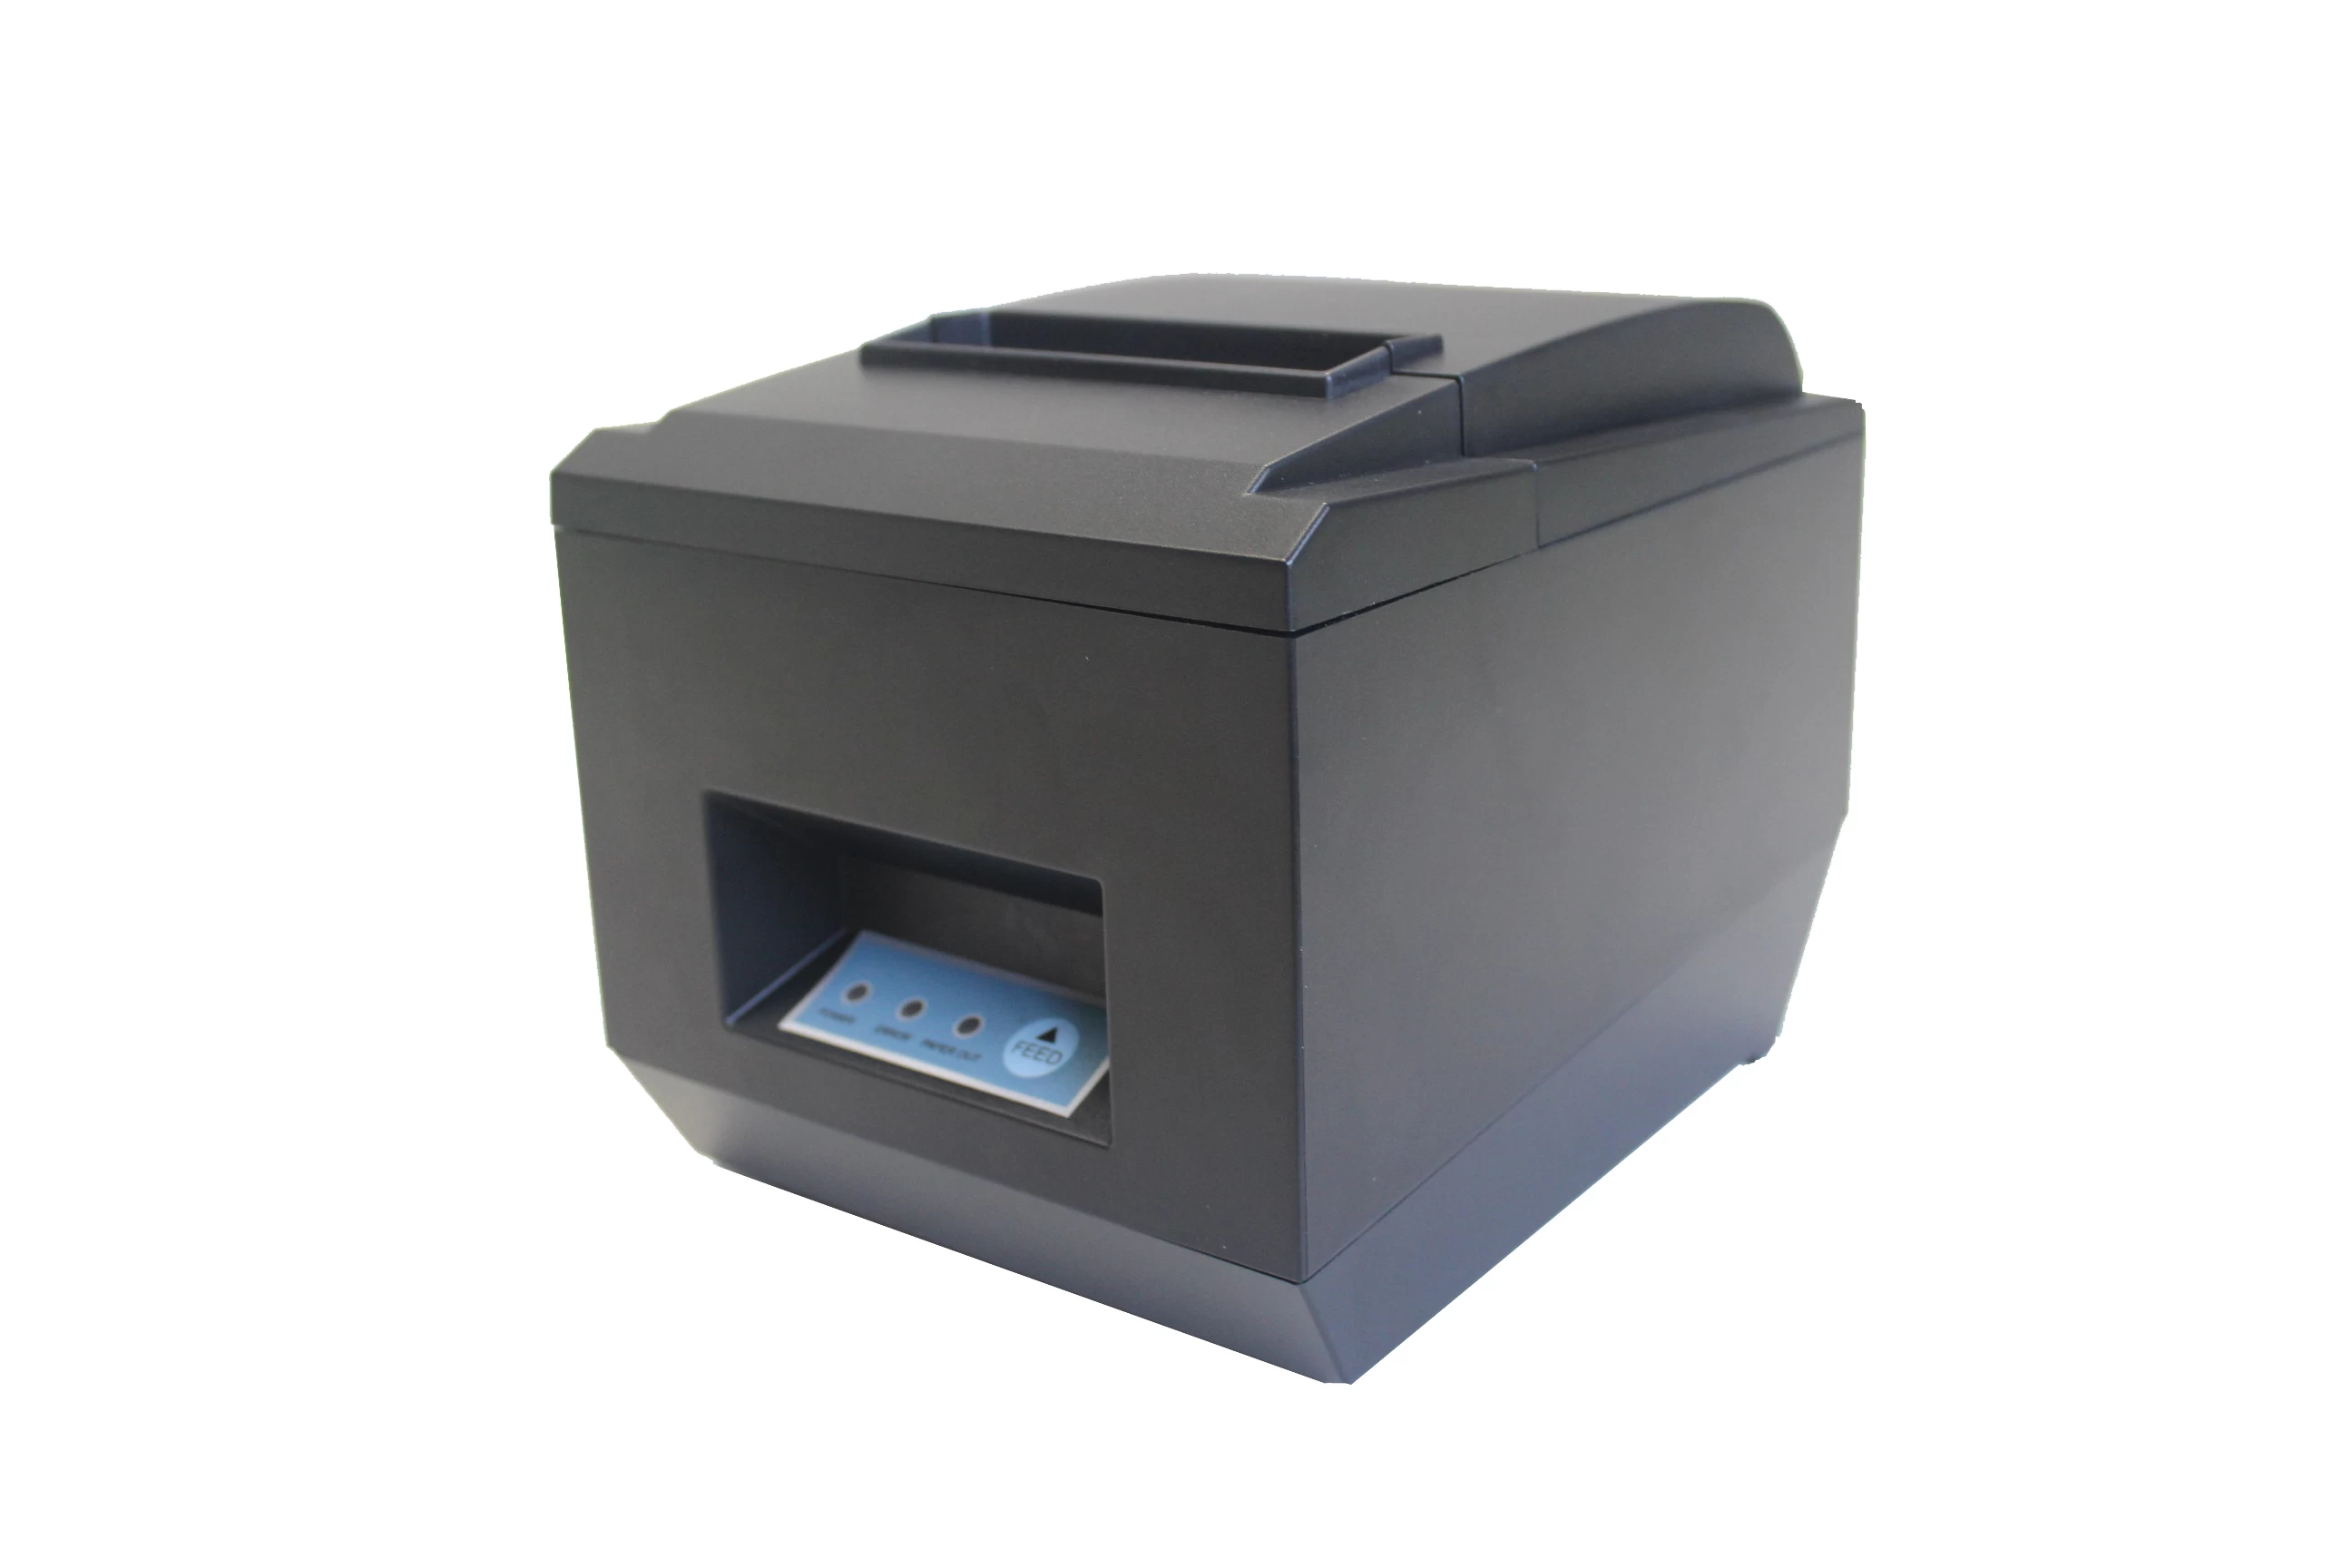 80mm thermal receipt printer with bluetooth and WIFI optional